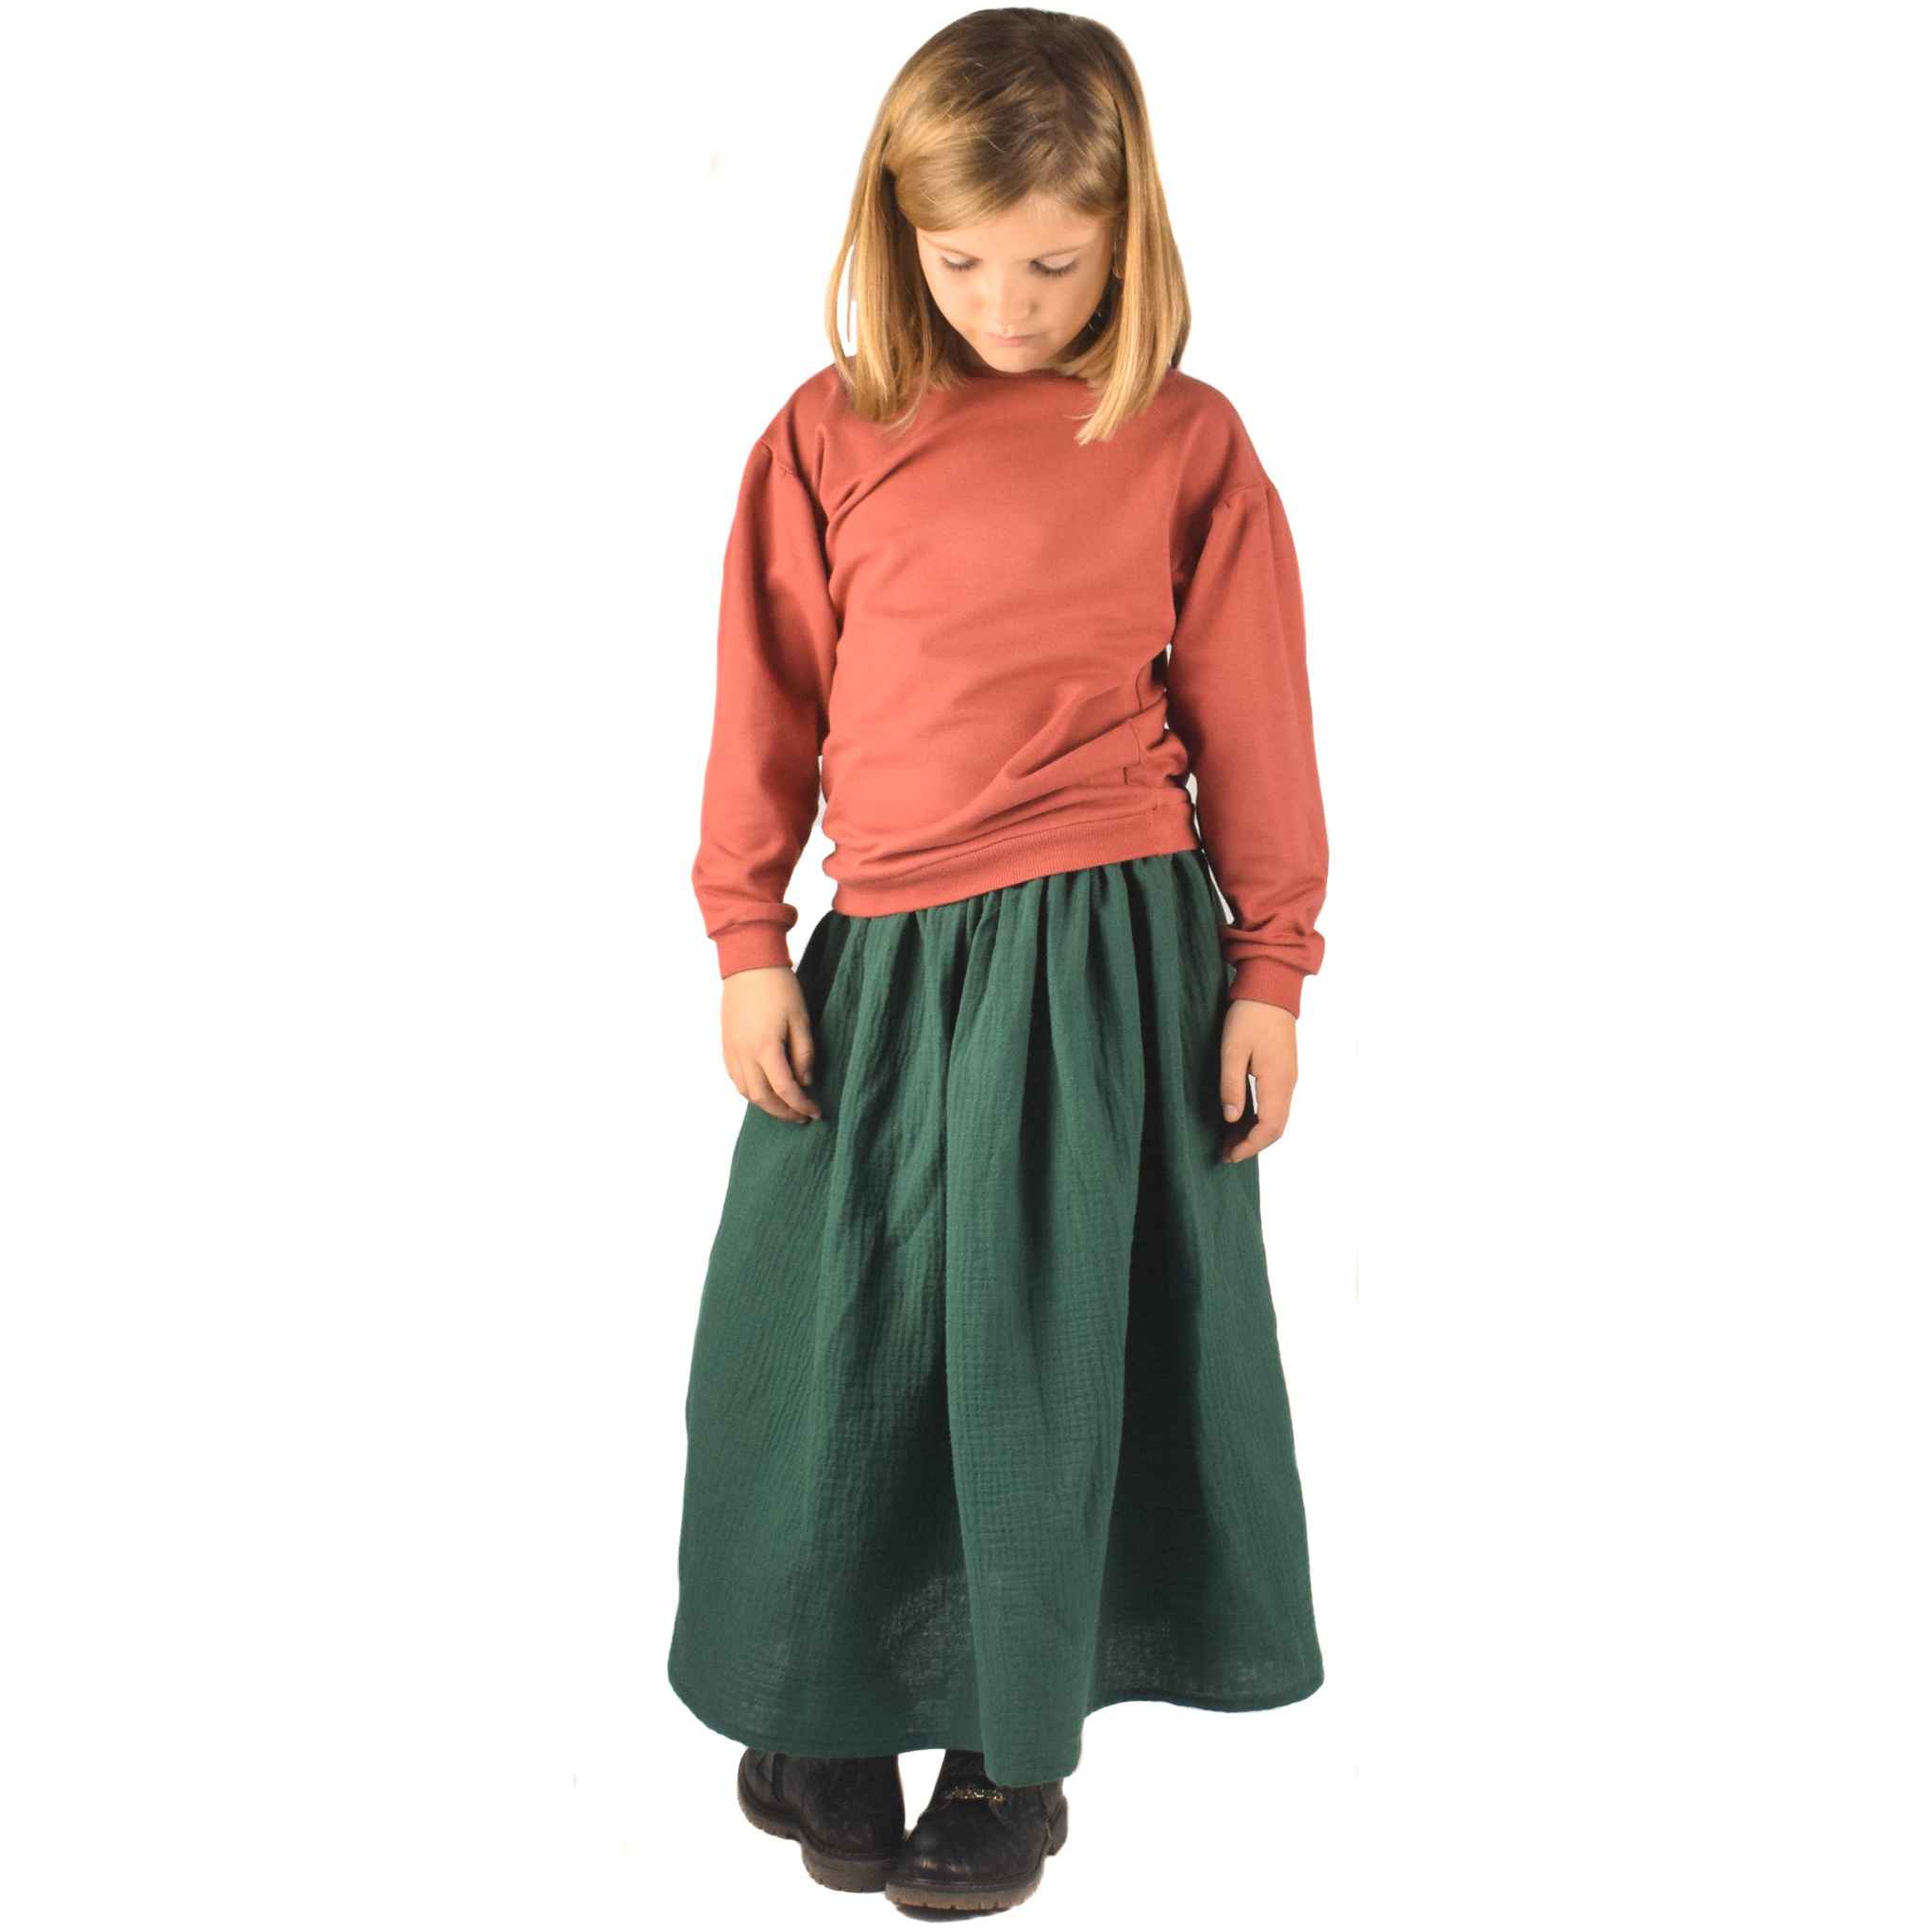 Skirt Alert Kids: Sewing Fun And Fashion For Your Little Ones!